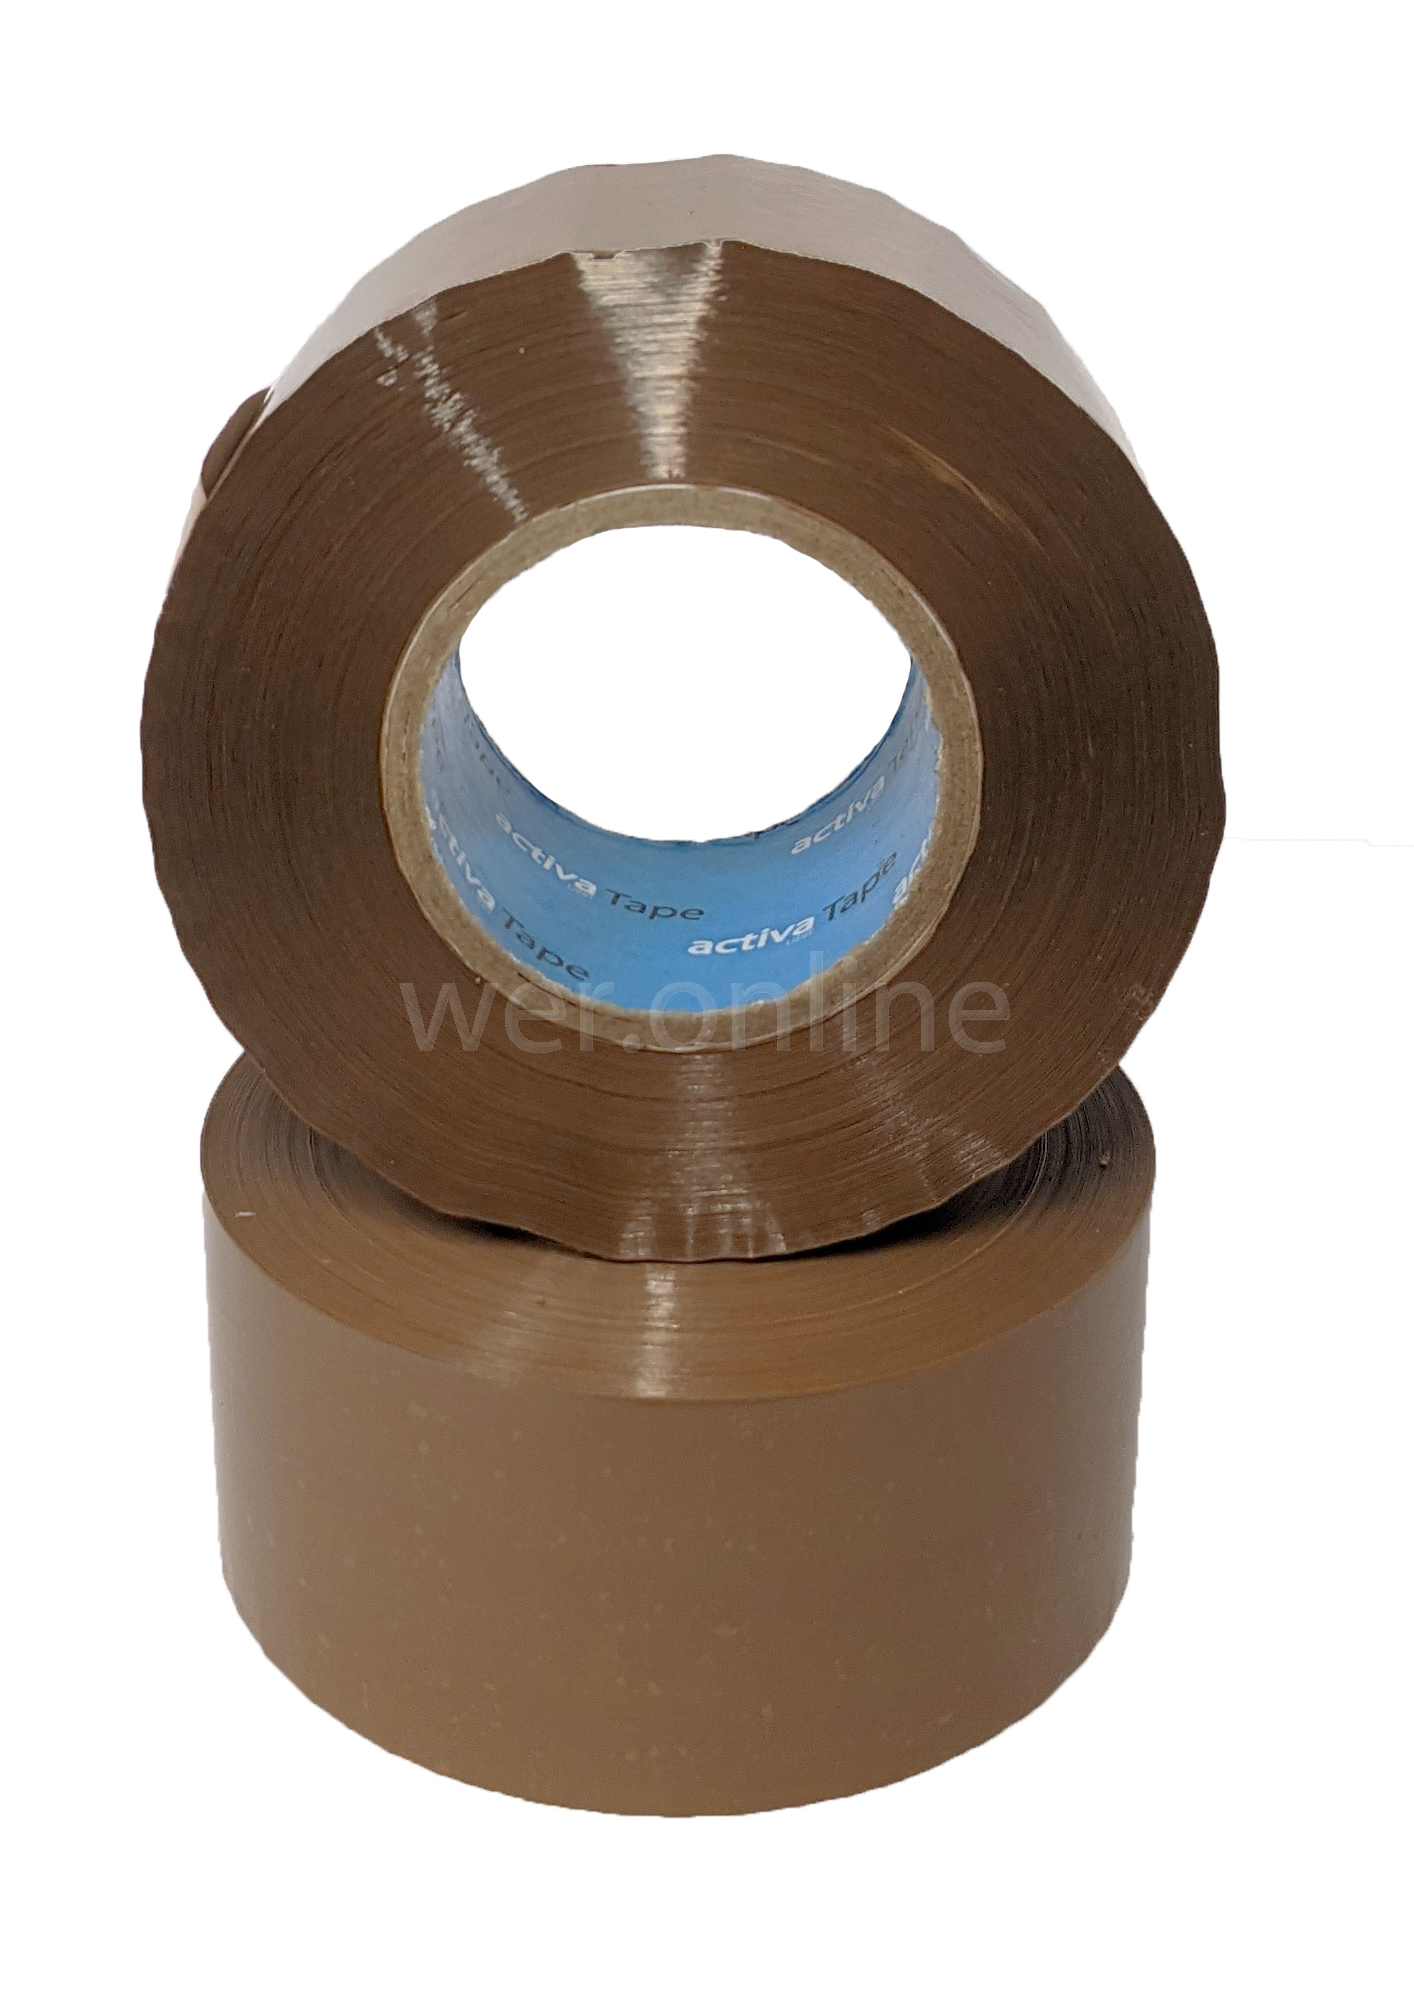 Brown Packing Tape Parcel Strong Box/Carton Sealing Packaging 48mm x 50 Rolls 